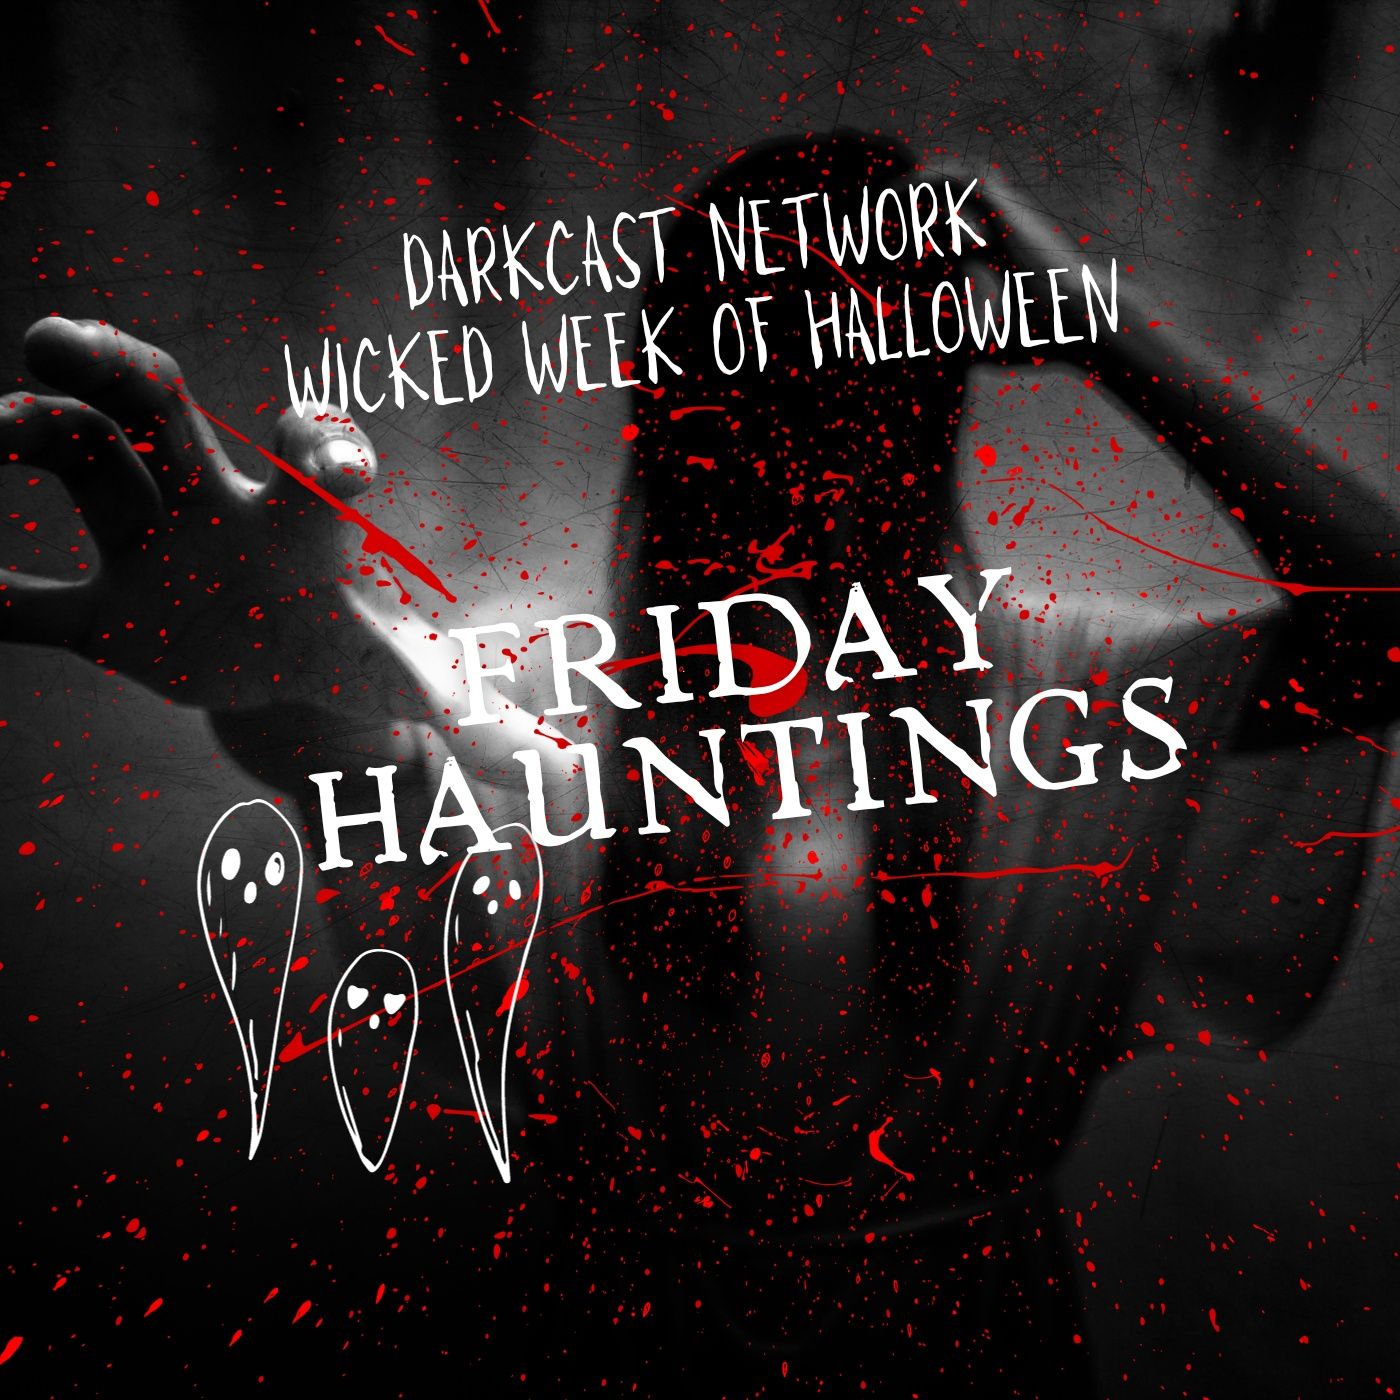 Freaky Friday - A Haunting We Shall Go!